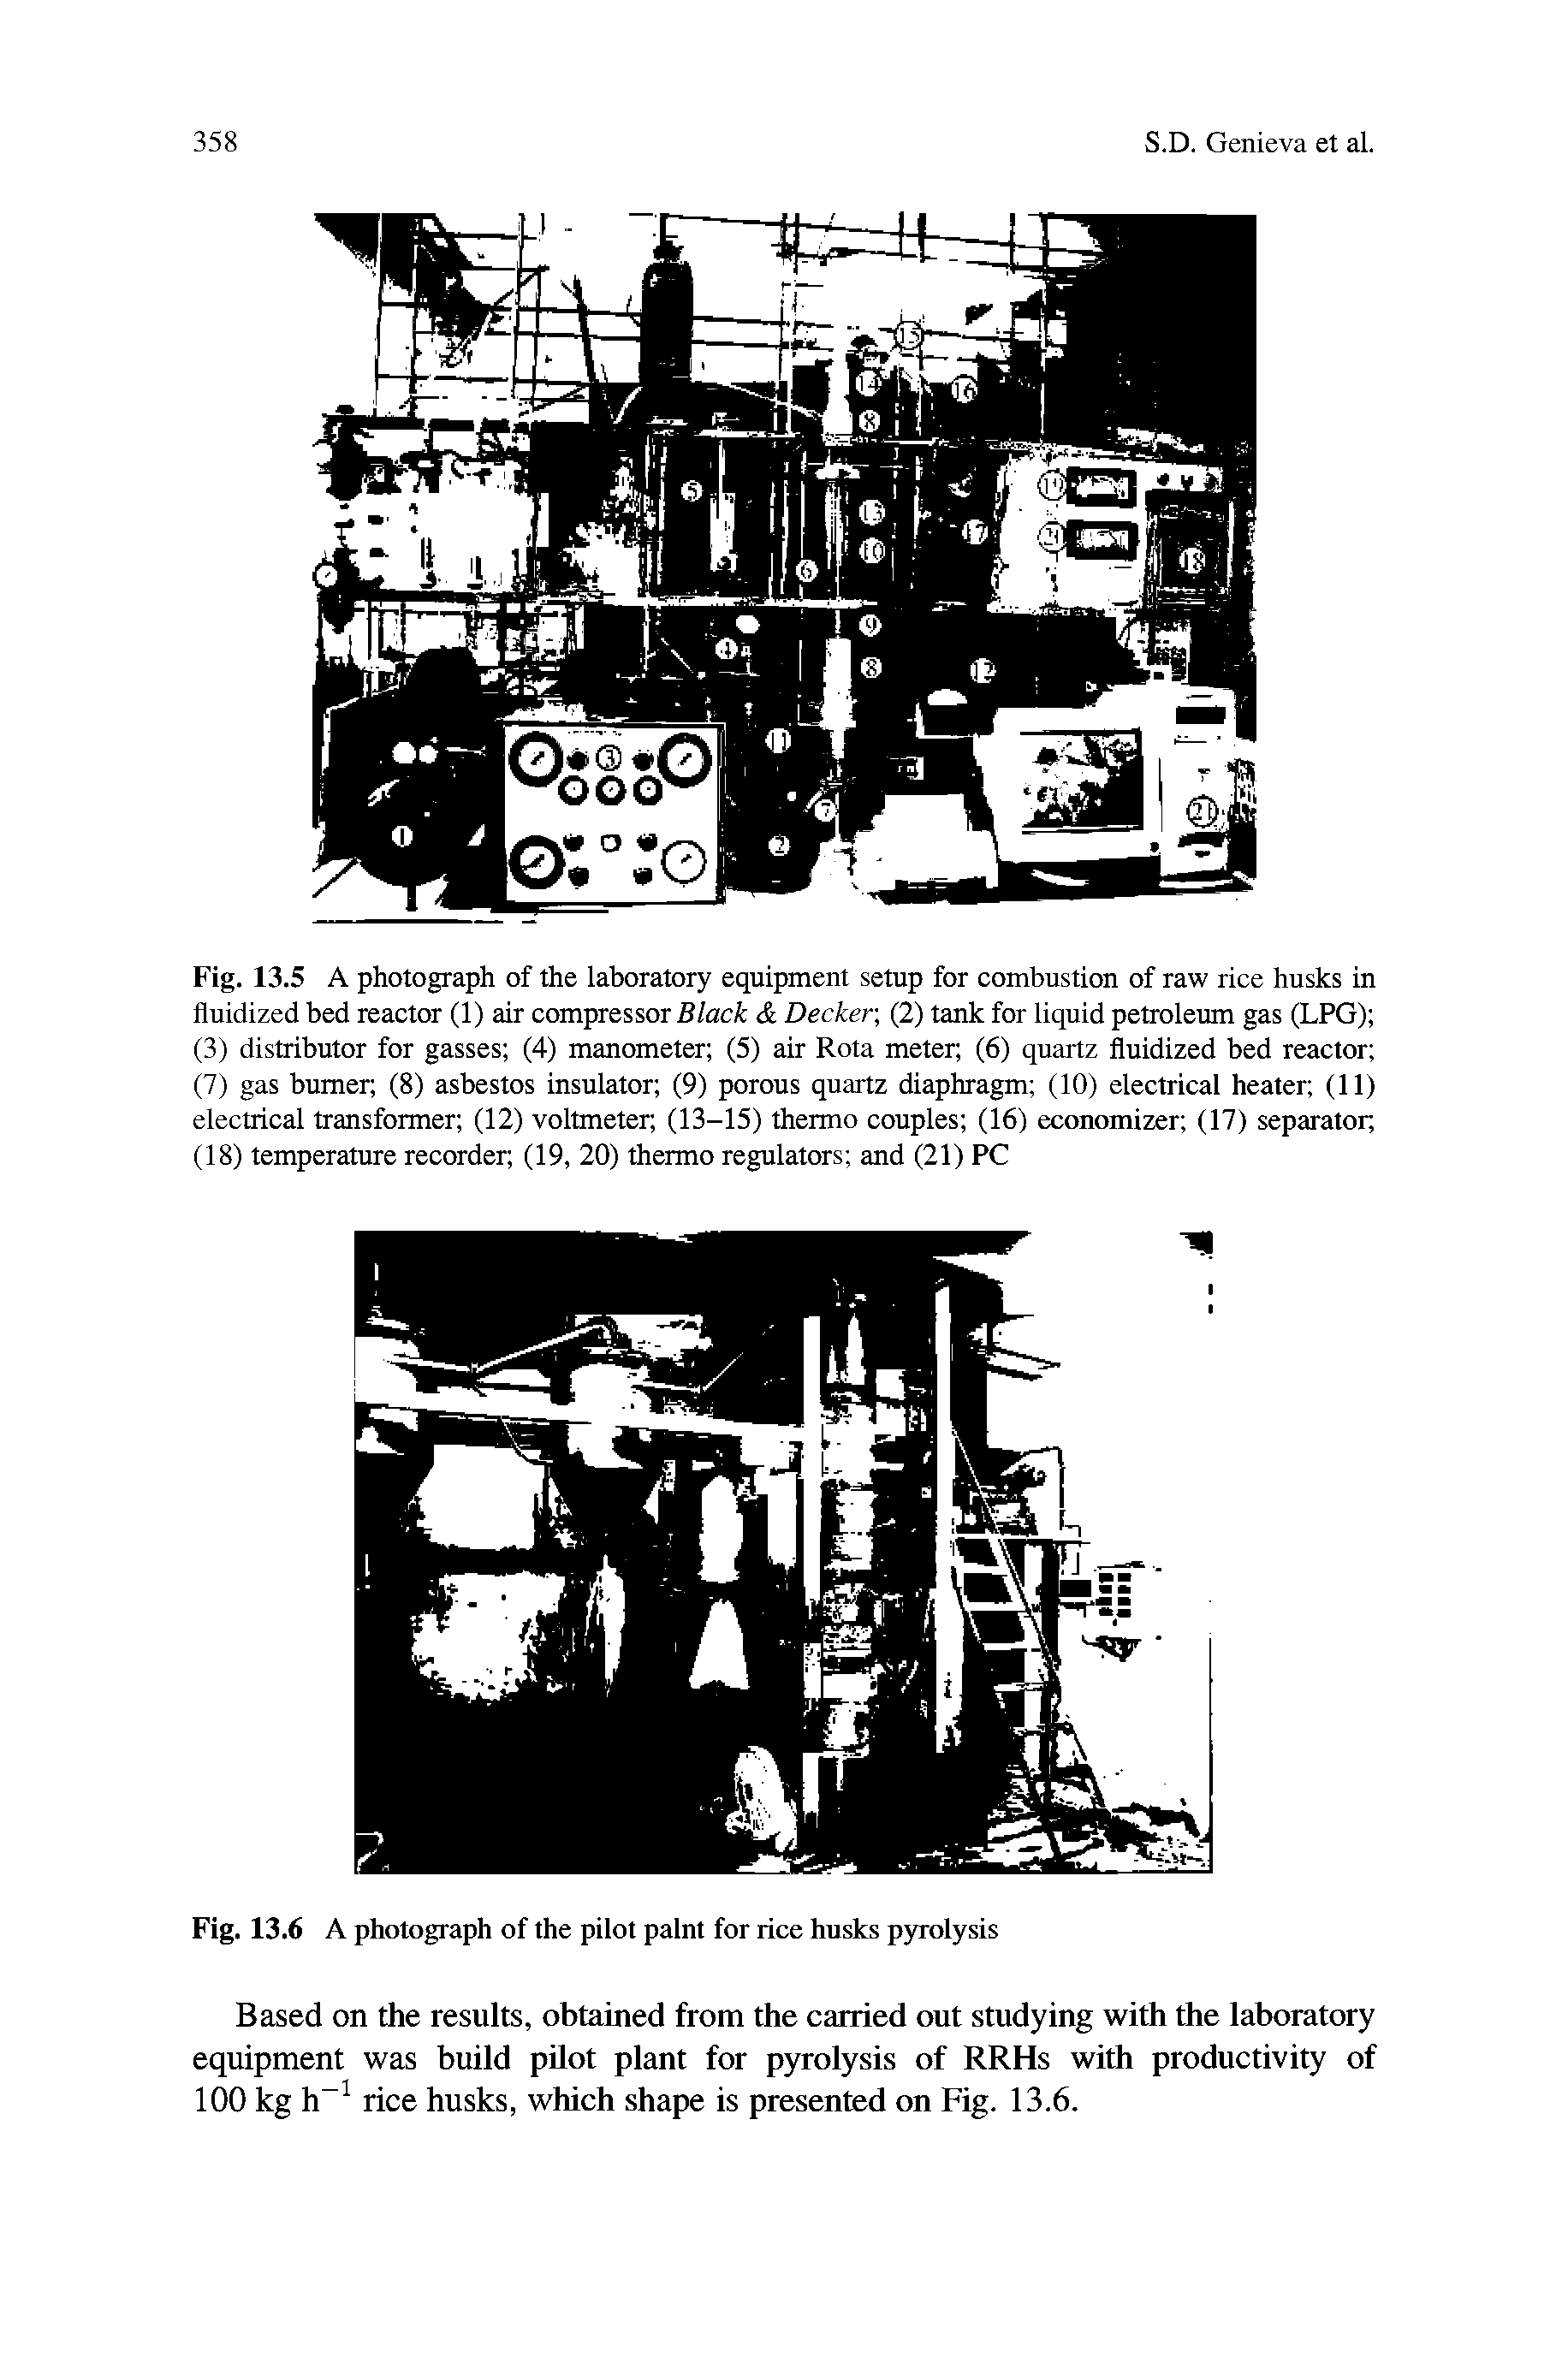 Fig. 13.5 A photograph of the laboratory equipment setup for combustion of raw rice husks in fluidized bed reactor (1) air compressor B/ac Decker, (2) tank for liquid petroleum gas (LPG) (3) distributor for gasses (4) manometer (5) air Rota meter (6) quartz fluidized bed reactor (7) gas burner (8) asbestos insulator (9) porous quartz diaphragm (10) electrical heater (11) electrical transformer (12) voltmeter (13-15) thermo couples (16) economizer (17) separatot (18) temperature recorder (19, 20) thermo regulators and (21) PC...